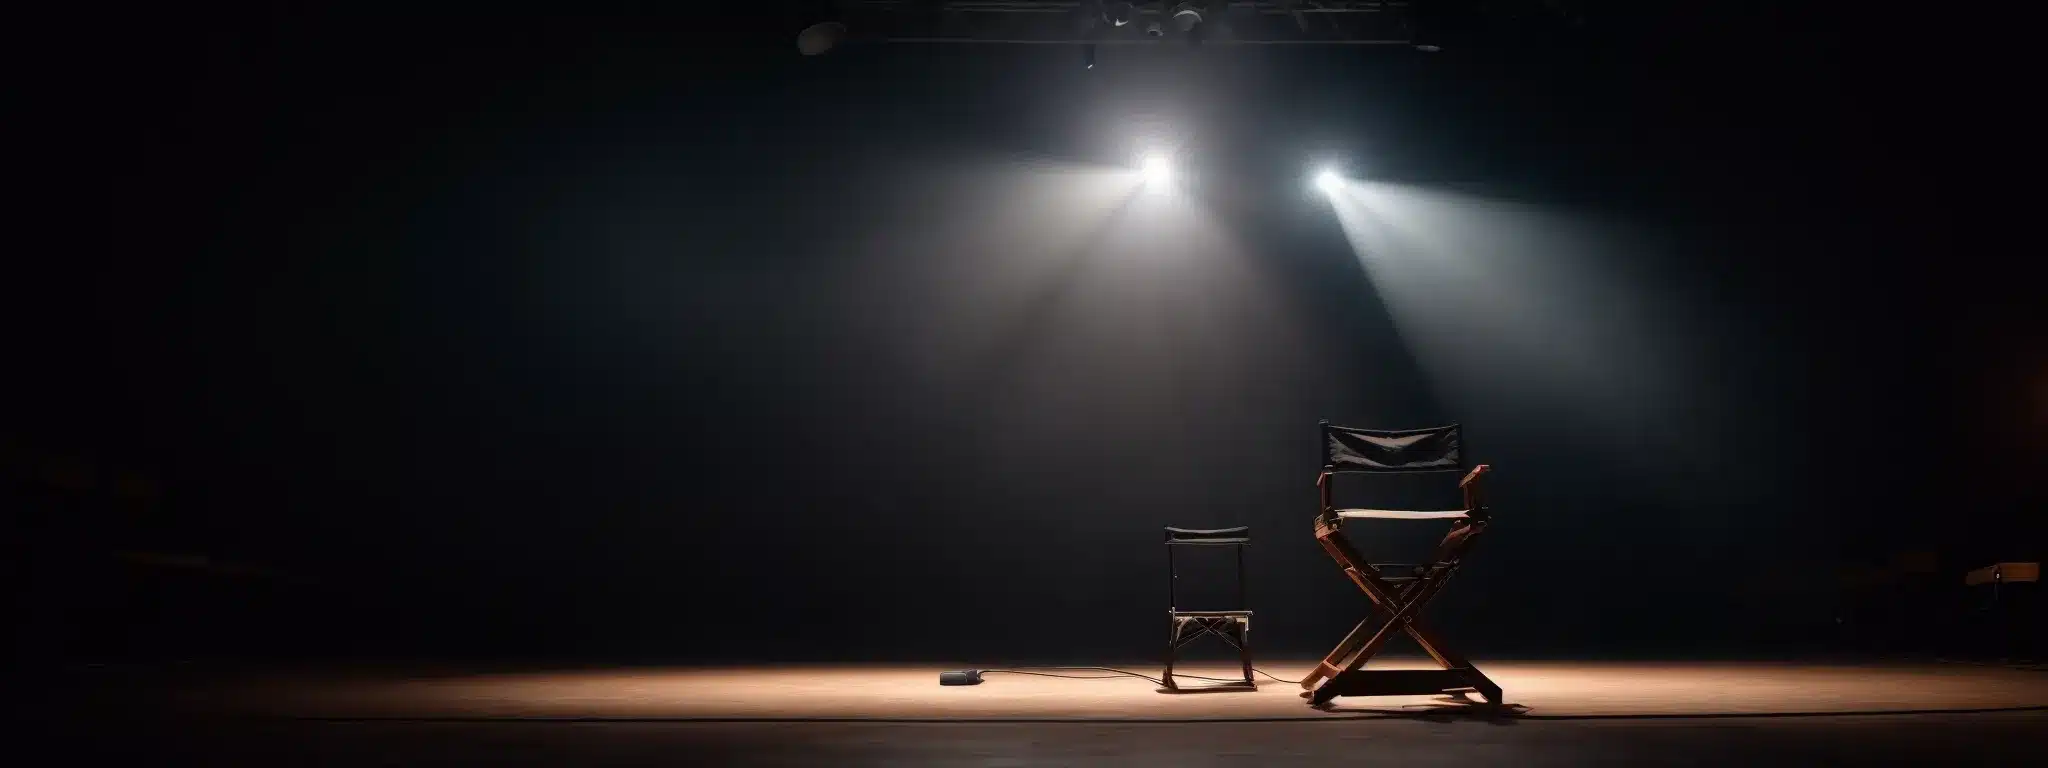 A Spotlight Illuminates An Empty Stage With A Single Director'S Chair, Poised For The Arrival Of A Creative Visionary.